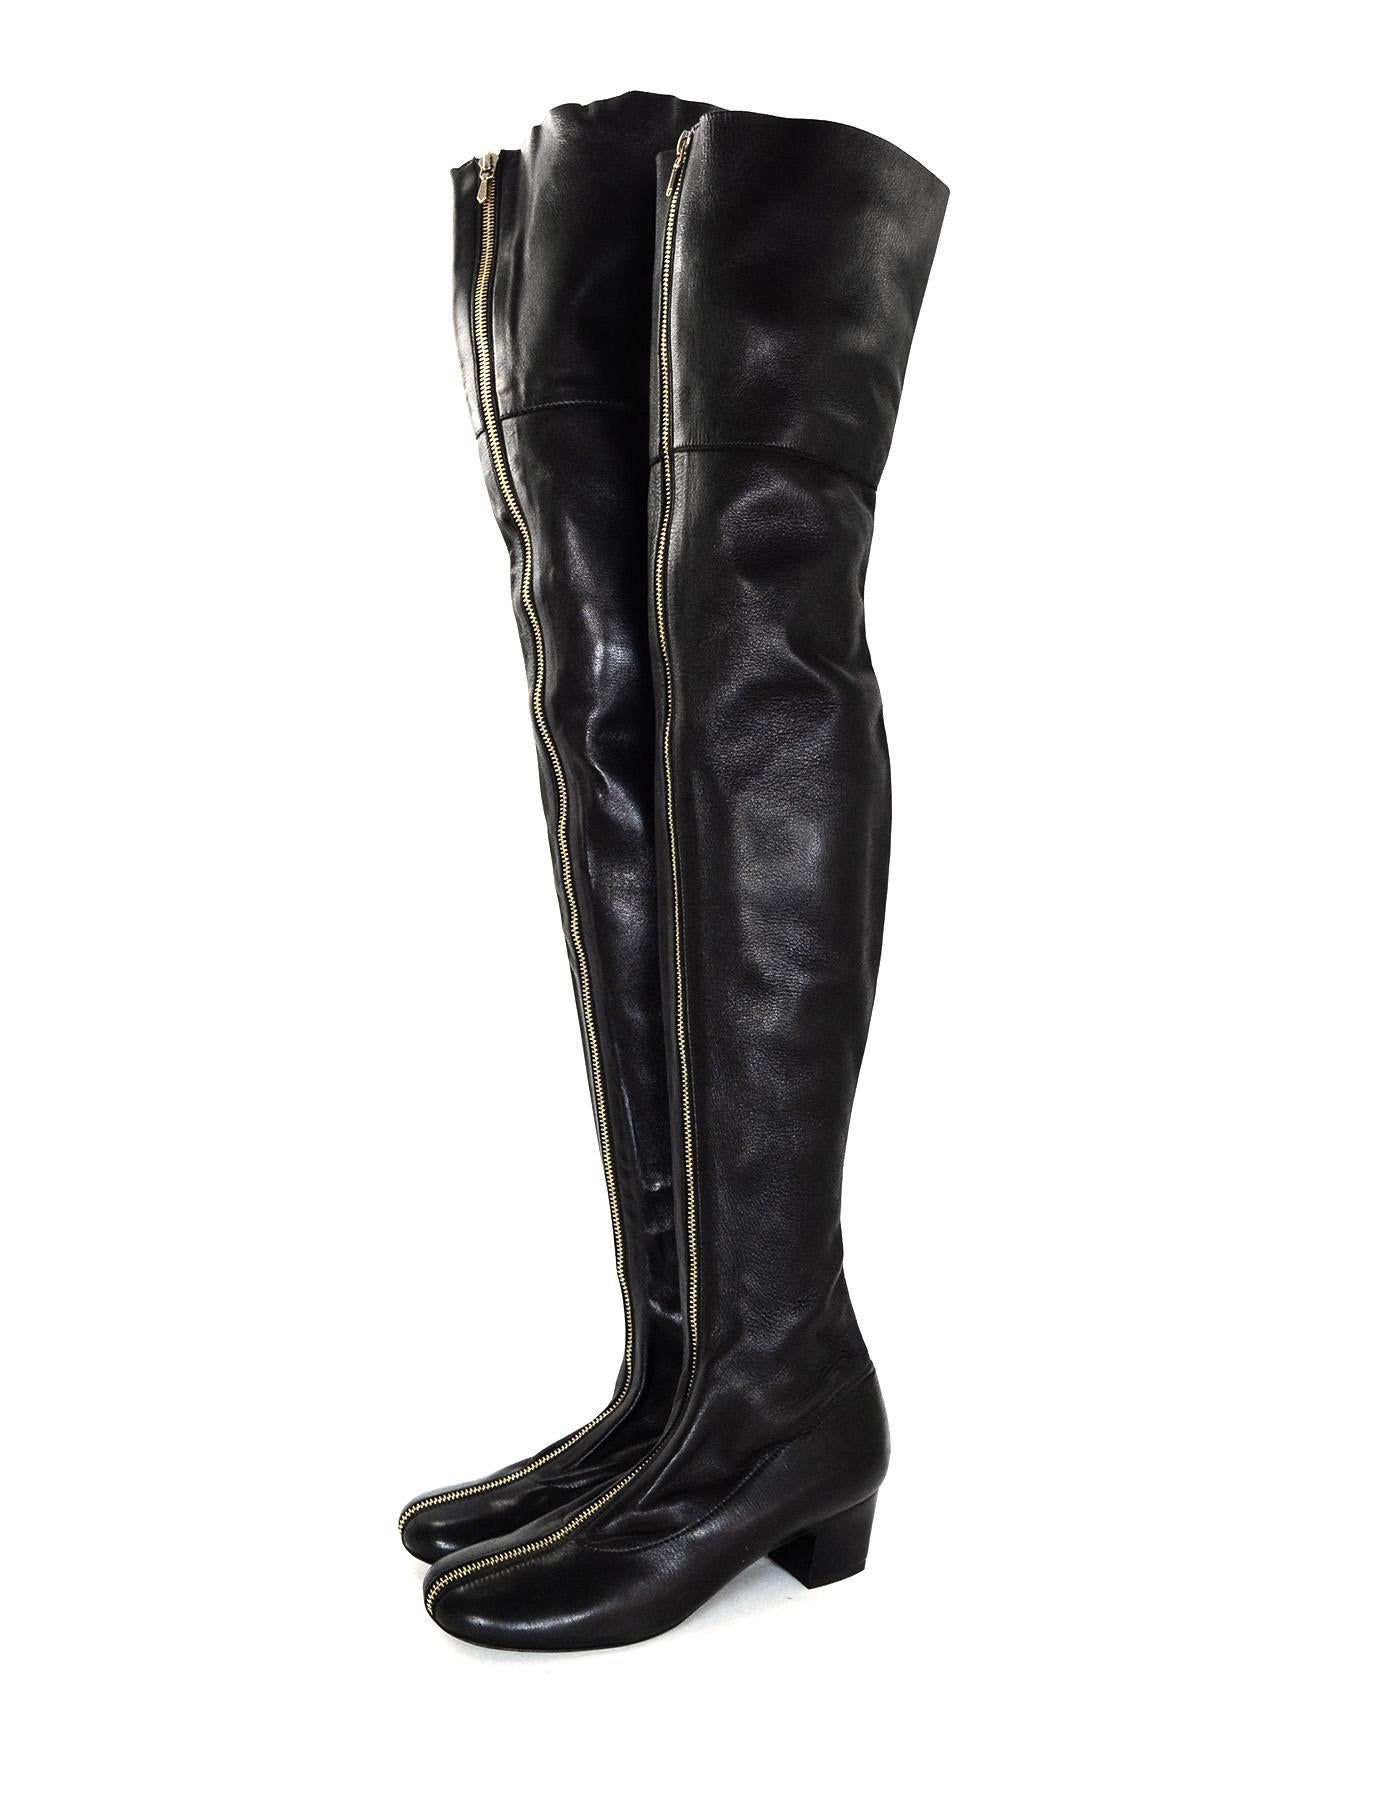 Chanel Black Over The Knee Goldtone Zipper Front Round Toe Boots Sz 6.5
**SOLD AS -IS- Please refer to the condition**

Made In: Italy
Color: Black
Hardware: Goldtone zipper
Materials: Leather 
Closure/Opening: Full front zipper
Overall Condition: